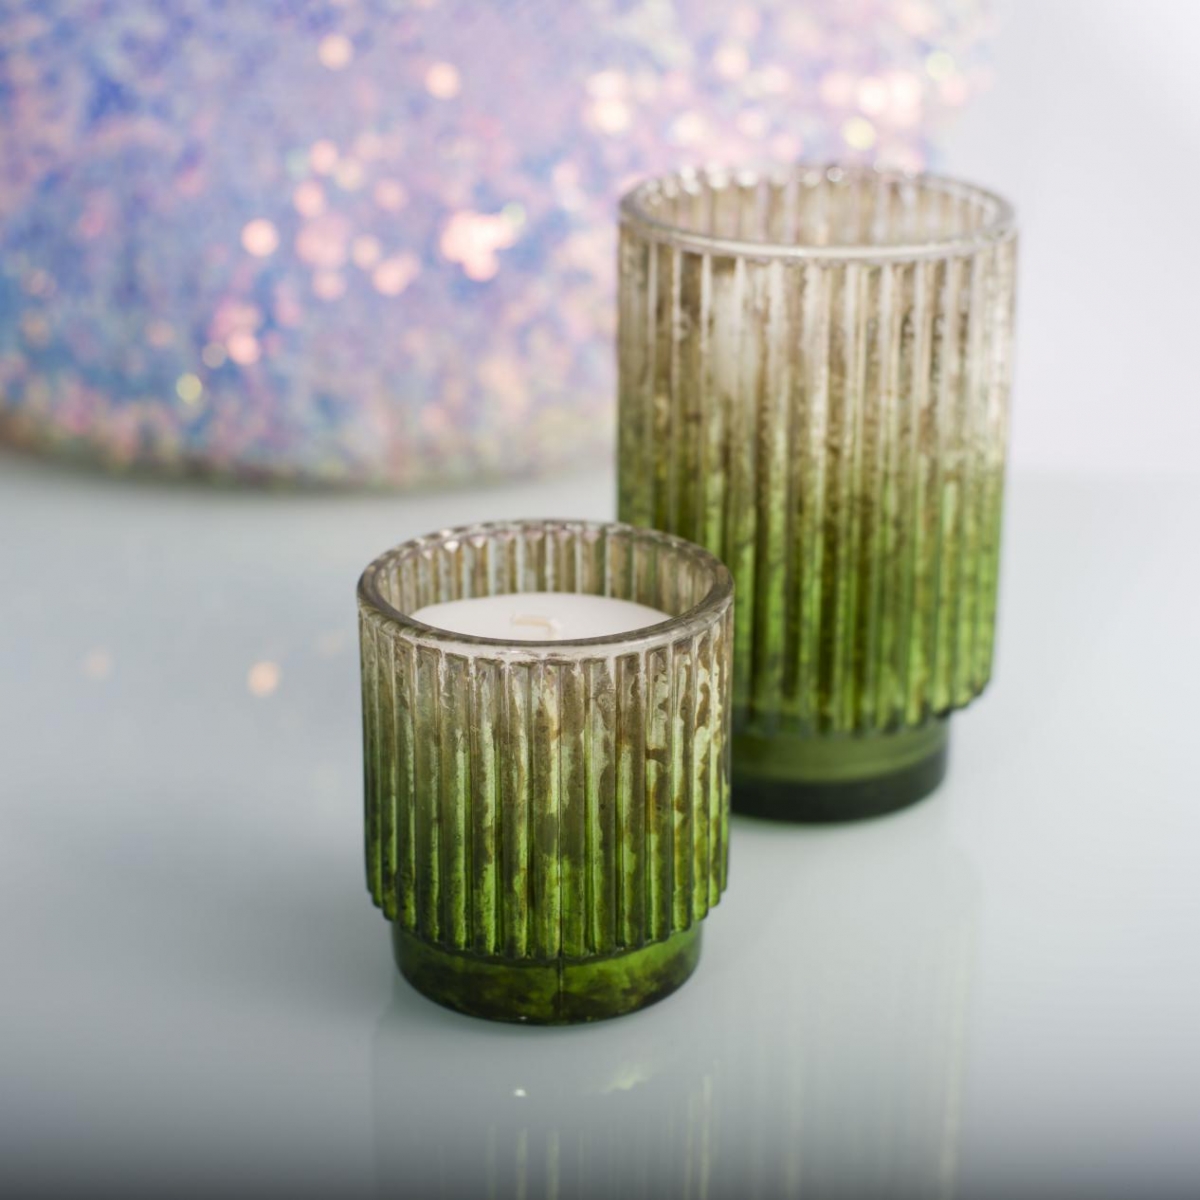 Christmas Candle Gift Sets : Stripe Embossed Glass Jar ,Retro Green ,China Factory ,Wholesale Price-HOWCANDLE-Candles,Scented Candles,Aromatherapy Candles,Soy Candles,Vegan Candles,Jar Candles,Pillar Candles,Candle Gift Sets,Essential Oils,Reed Diffuser,Candle Holder,